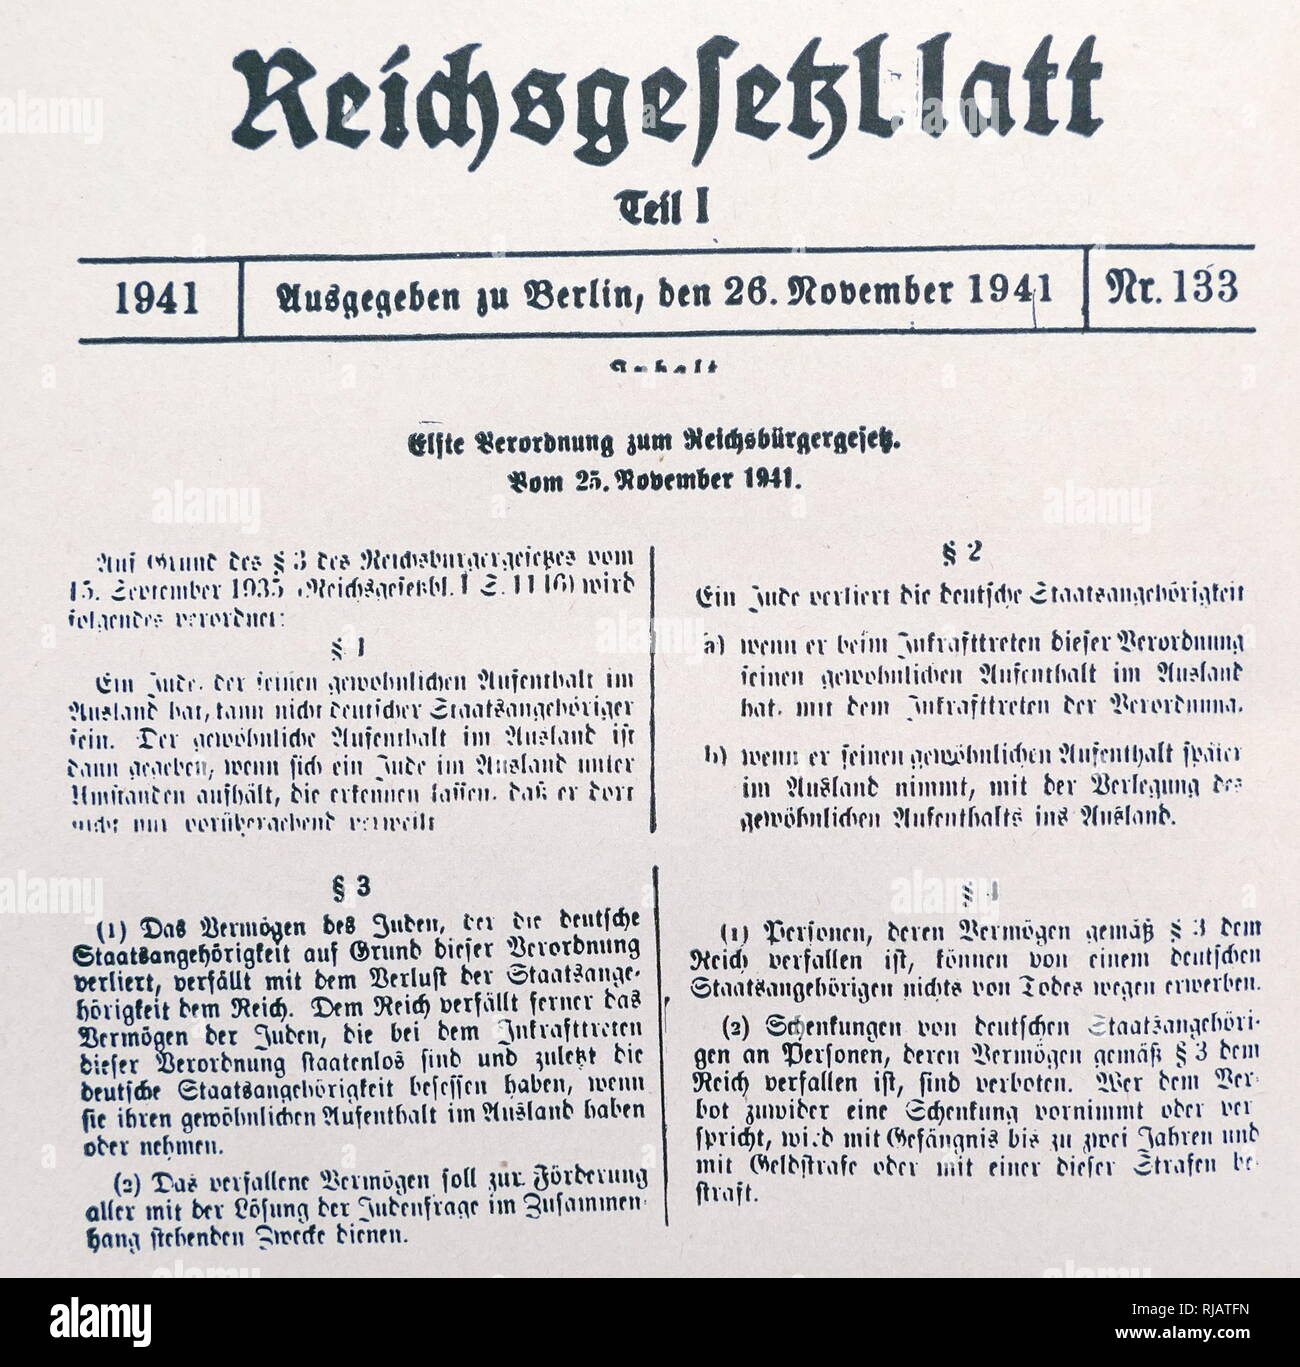 Nazi Era, Eleventh Decree Supplementing the Reich Law on Citizenship. Issued November 25, 1941. A Jew residing abroad cannot be a German subject. The property of a Jew who has 'ceased- to be a German subject by virtue of this decree is confiscated by the German Reich. Such confiscated property will be used for “purposes in connection with the solution of the Jewish question.” Jews whose property has thus been confiscated cannot be heirs of German citizens; presents to them are forbidden. Stock Photo